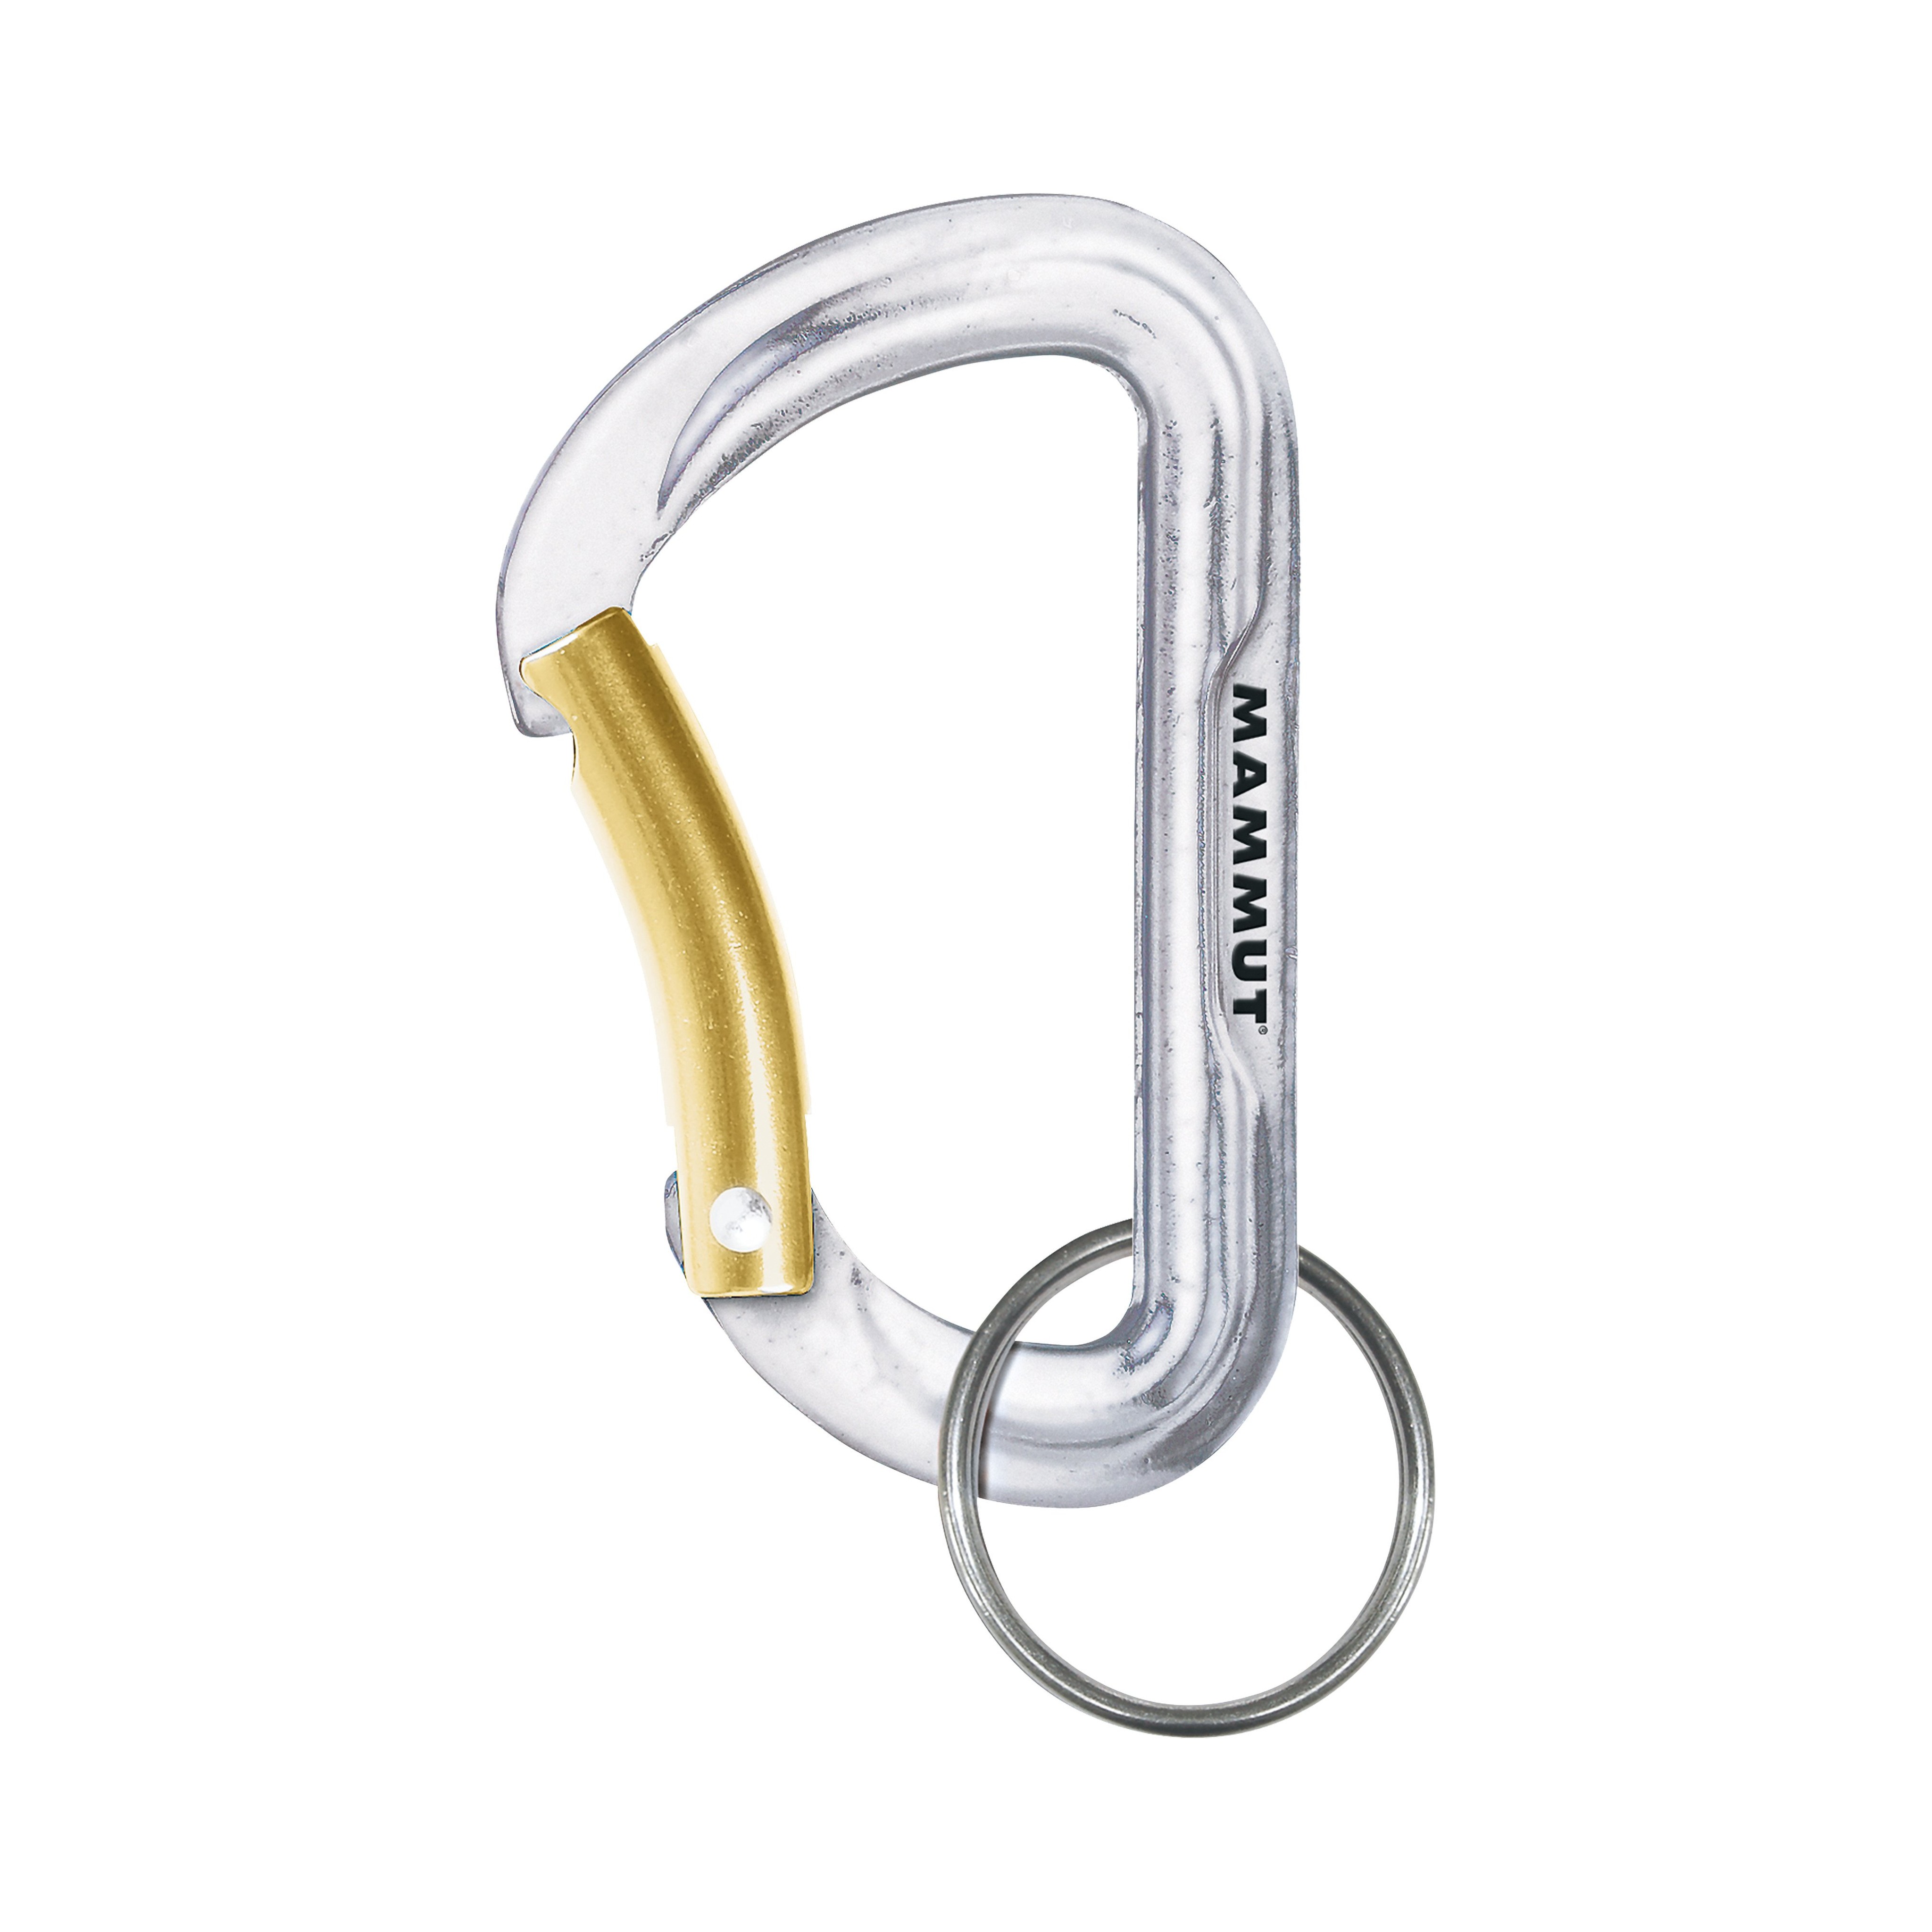 Mammut Mini Biner Element - silver-gold, one size product image